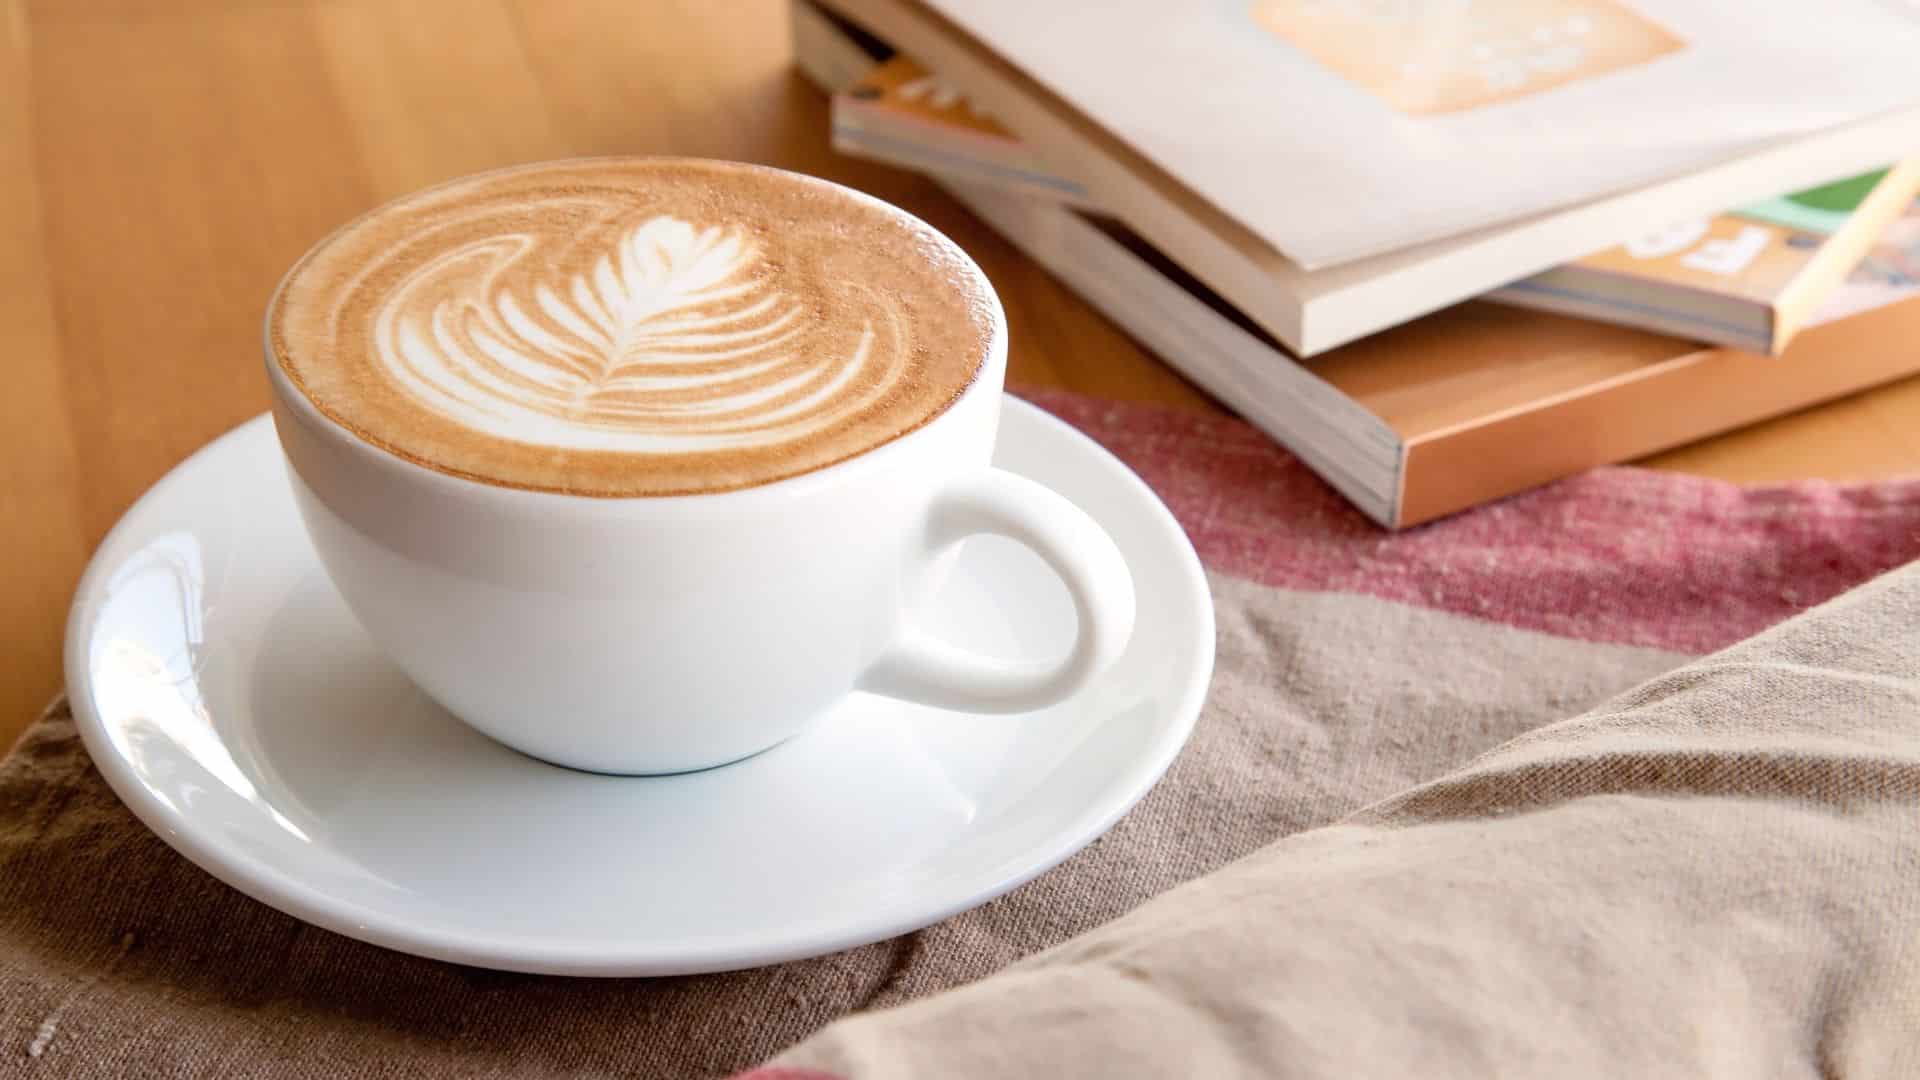 Cappuccino in a cup next to an open book